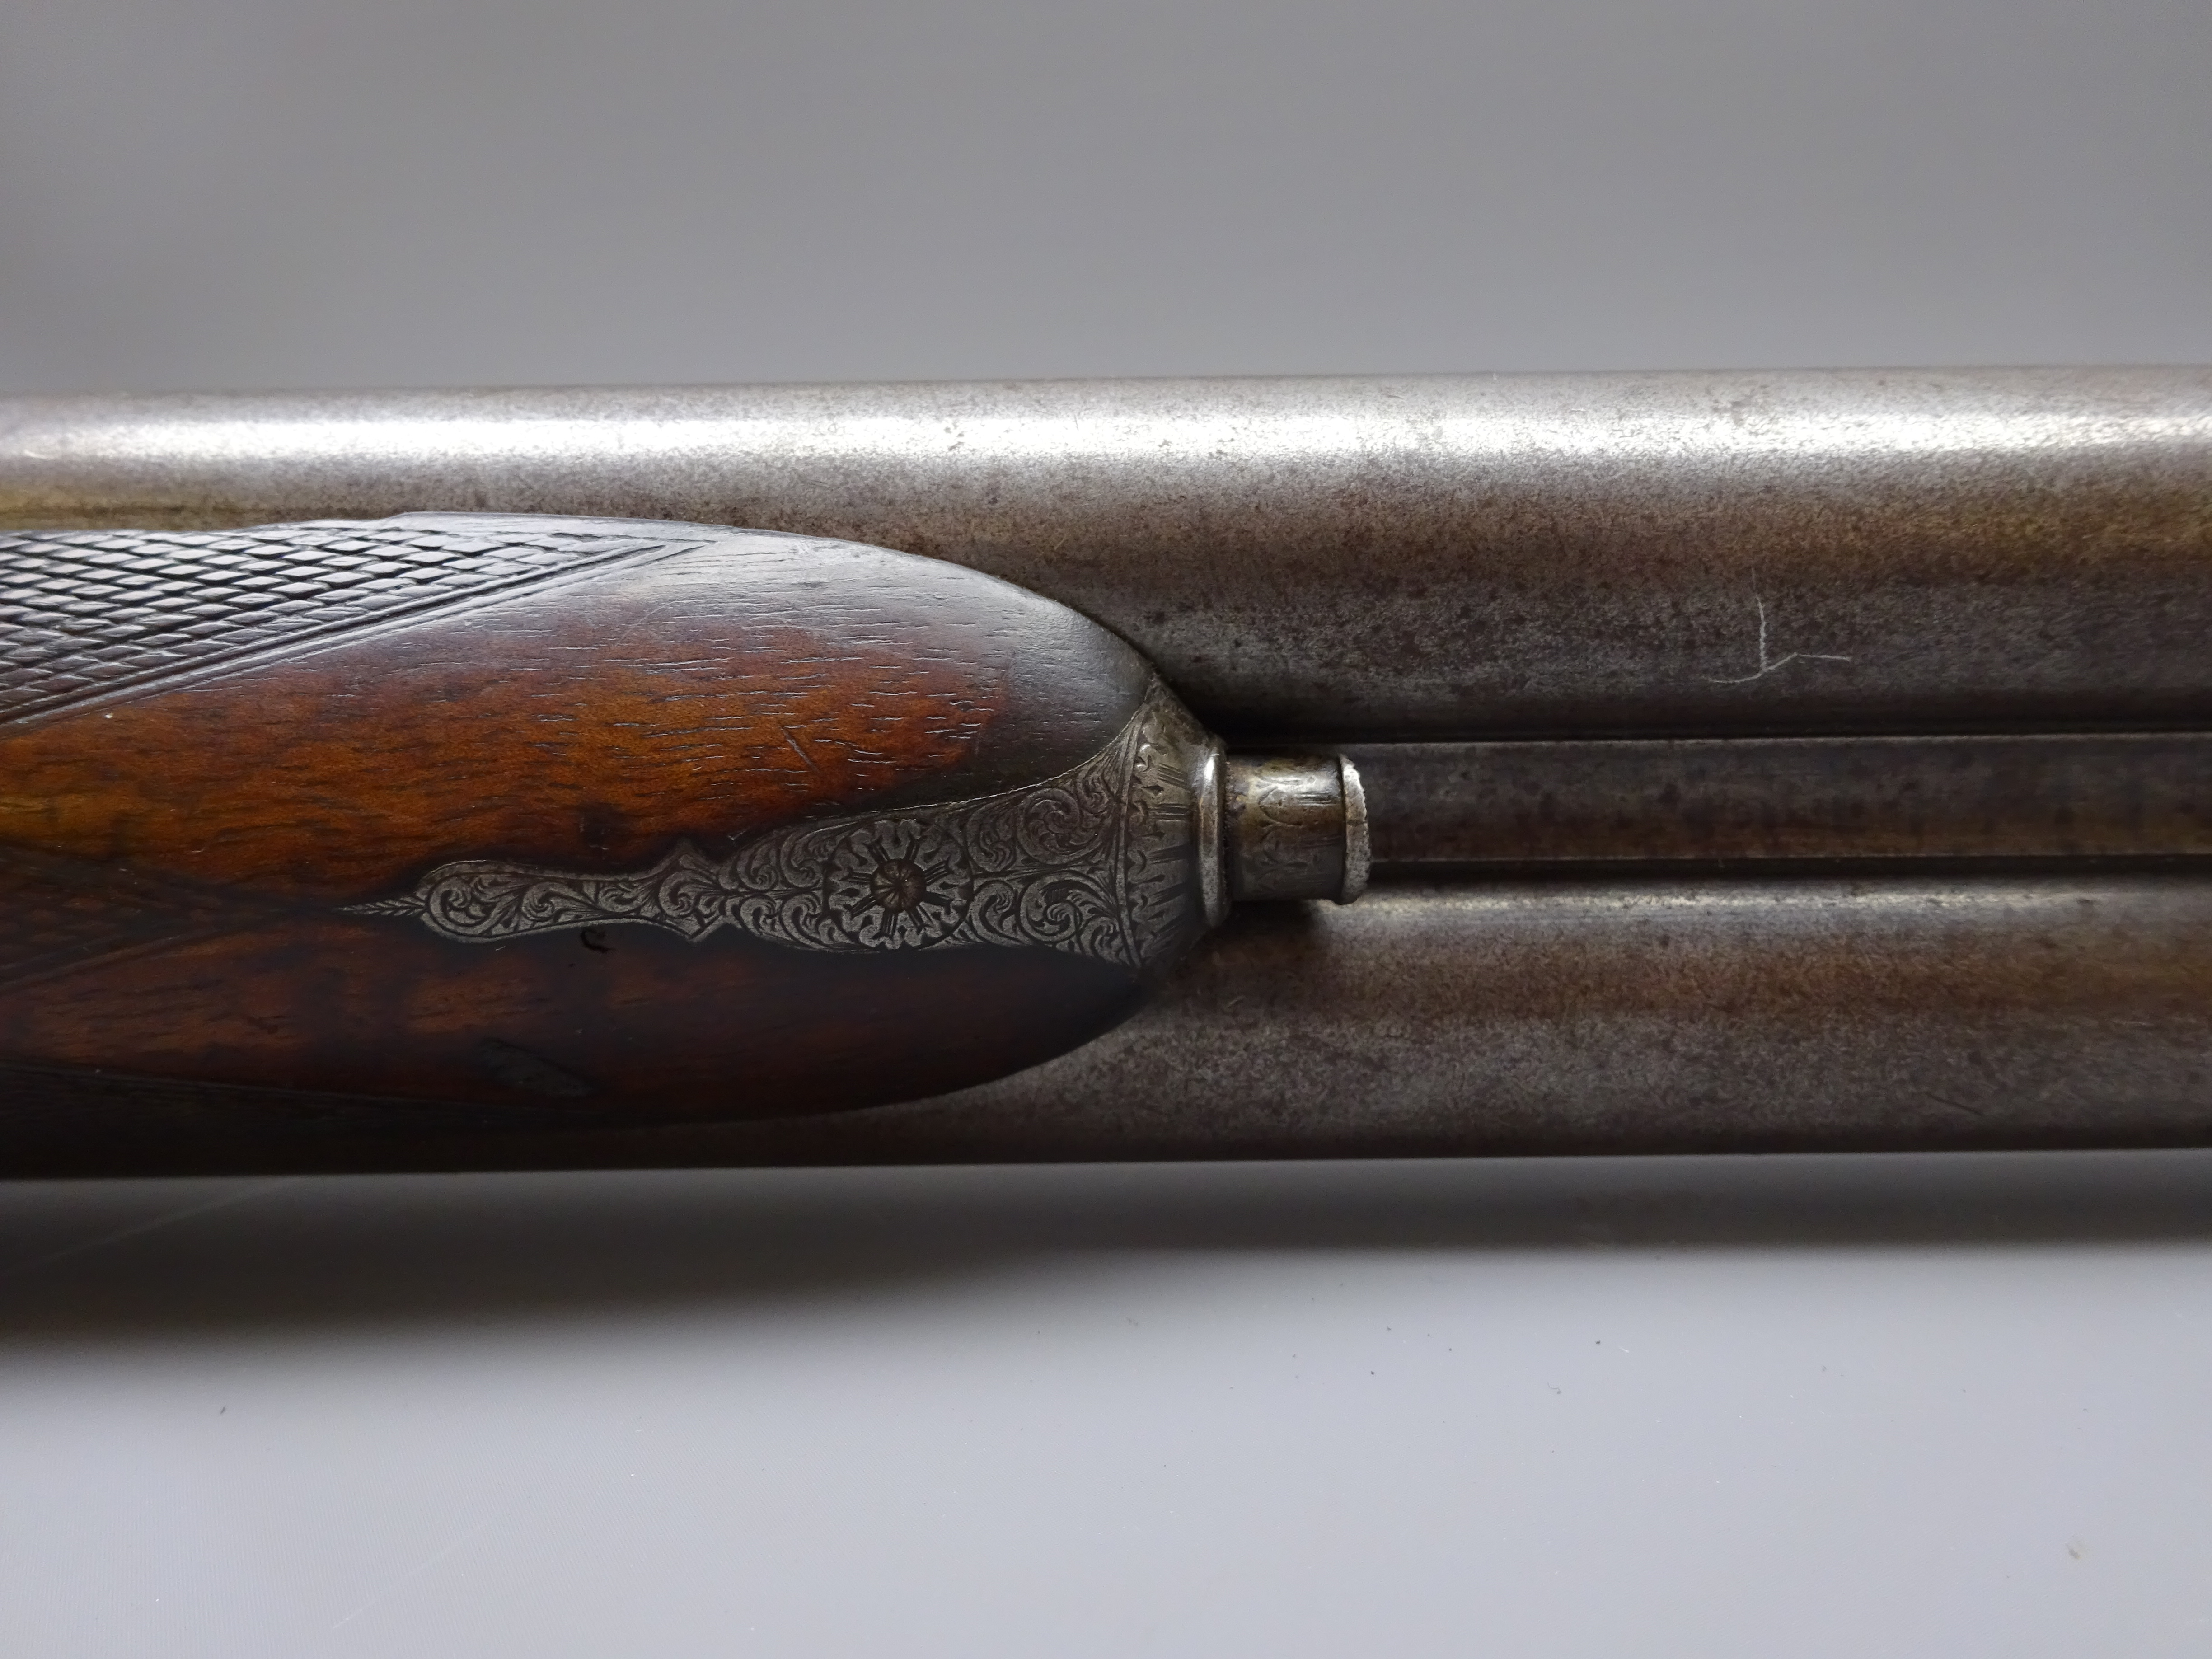 *LOT WITHDRAWN* English double barrel side by side 12 bore box lock sporting gun by Charles Boswell - Image 6 of 11